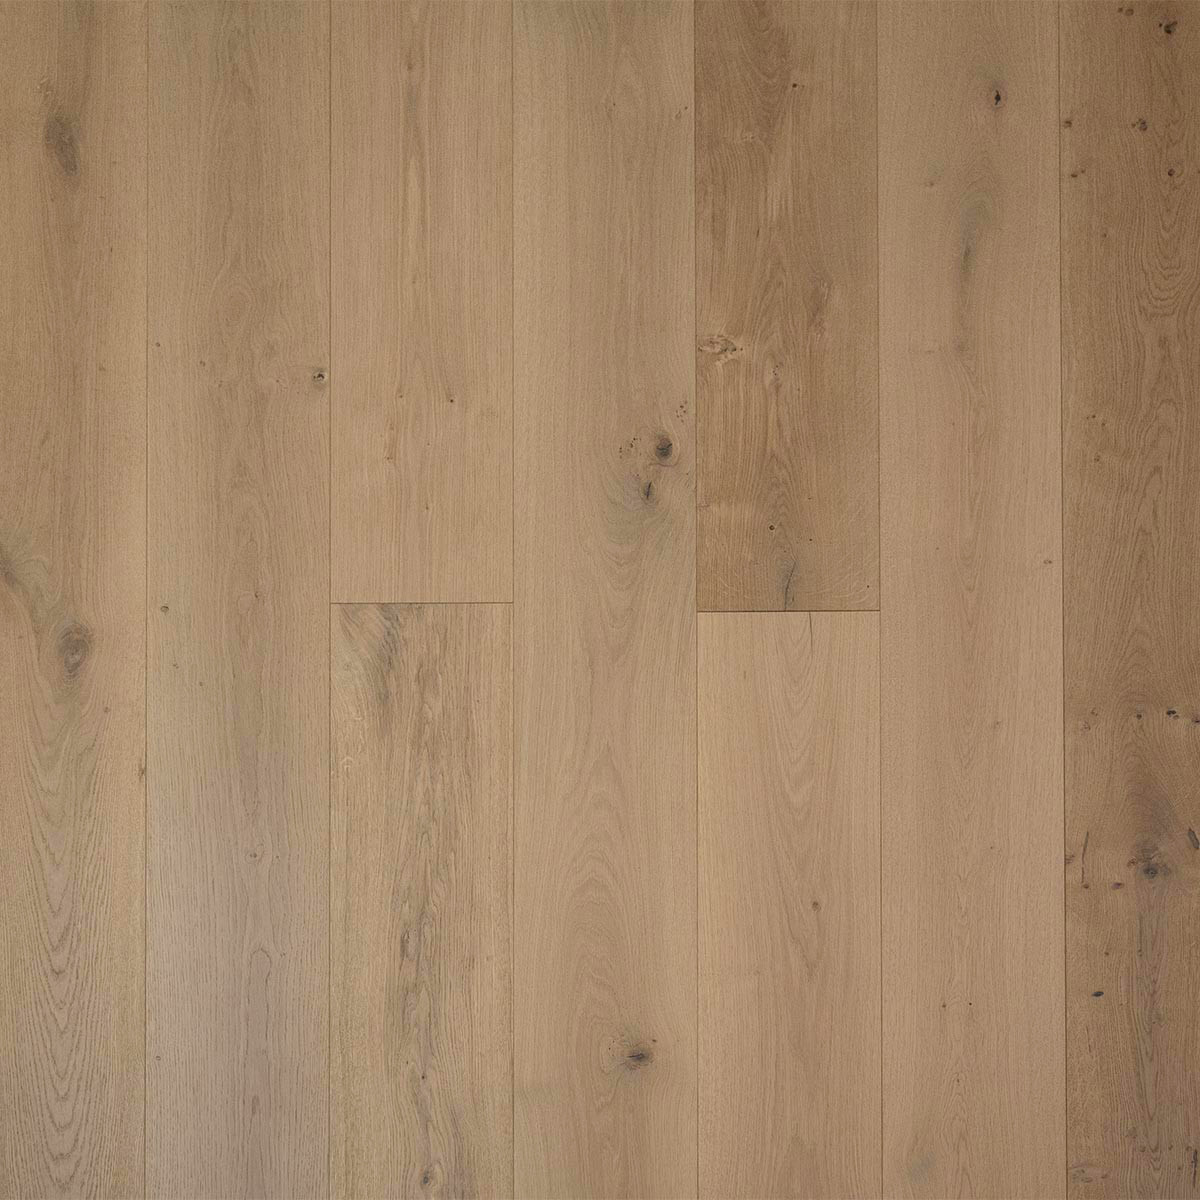 V4 DC203 White Smoked oak 190 Brushed and White Oiled rustic Smoked Oak